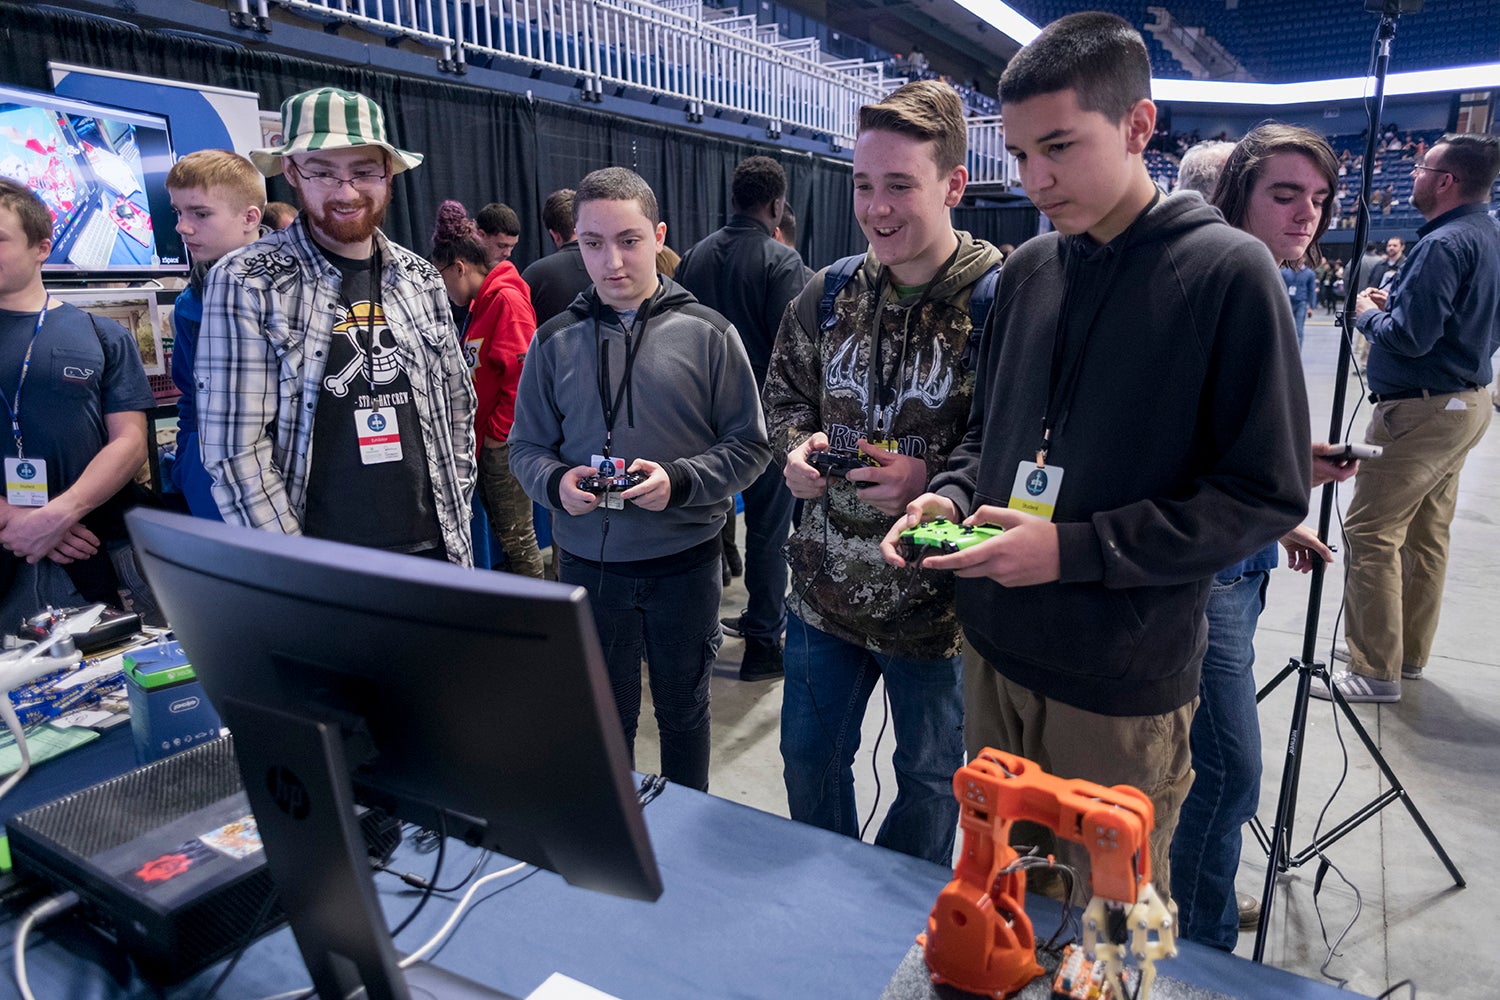 Students check out multi-player video games 